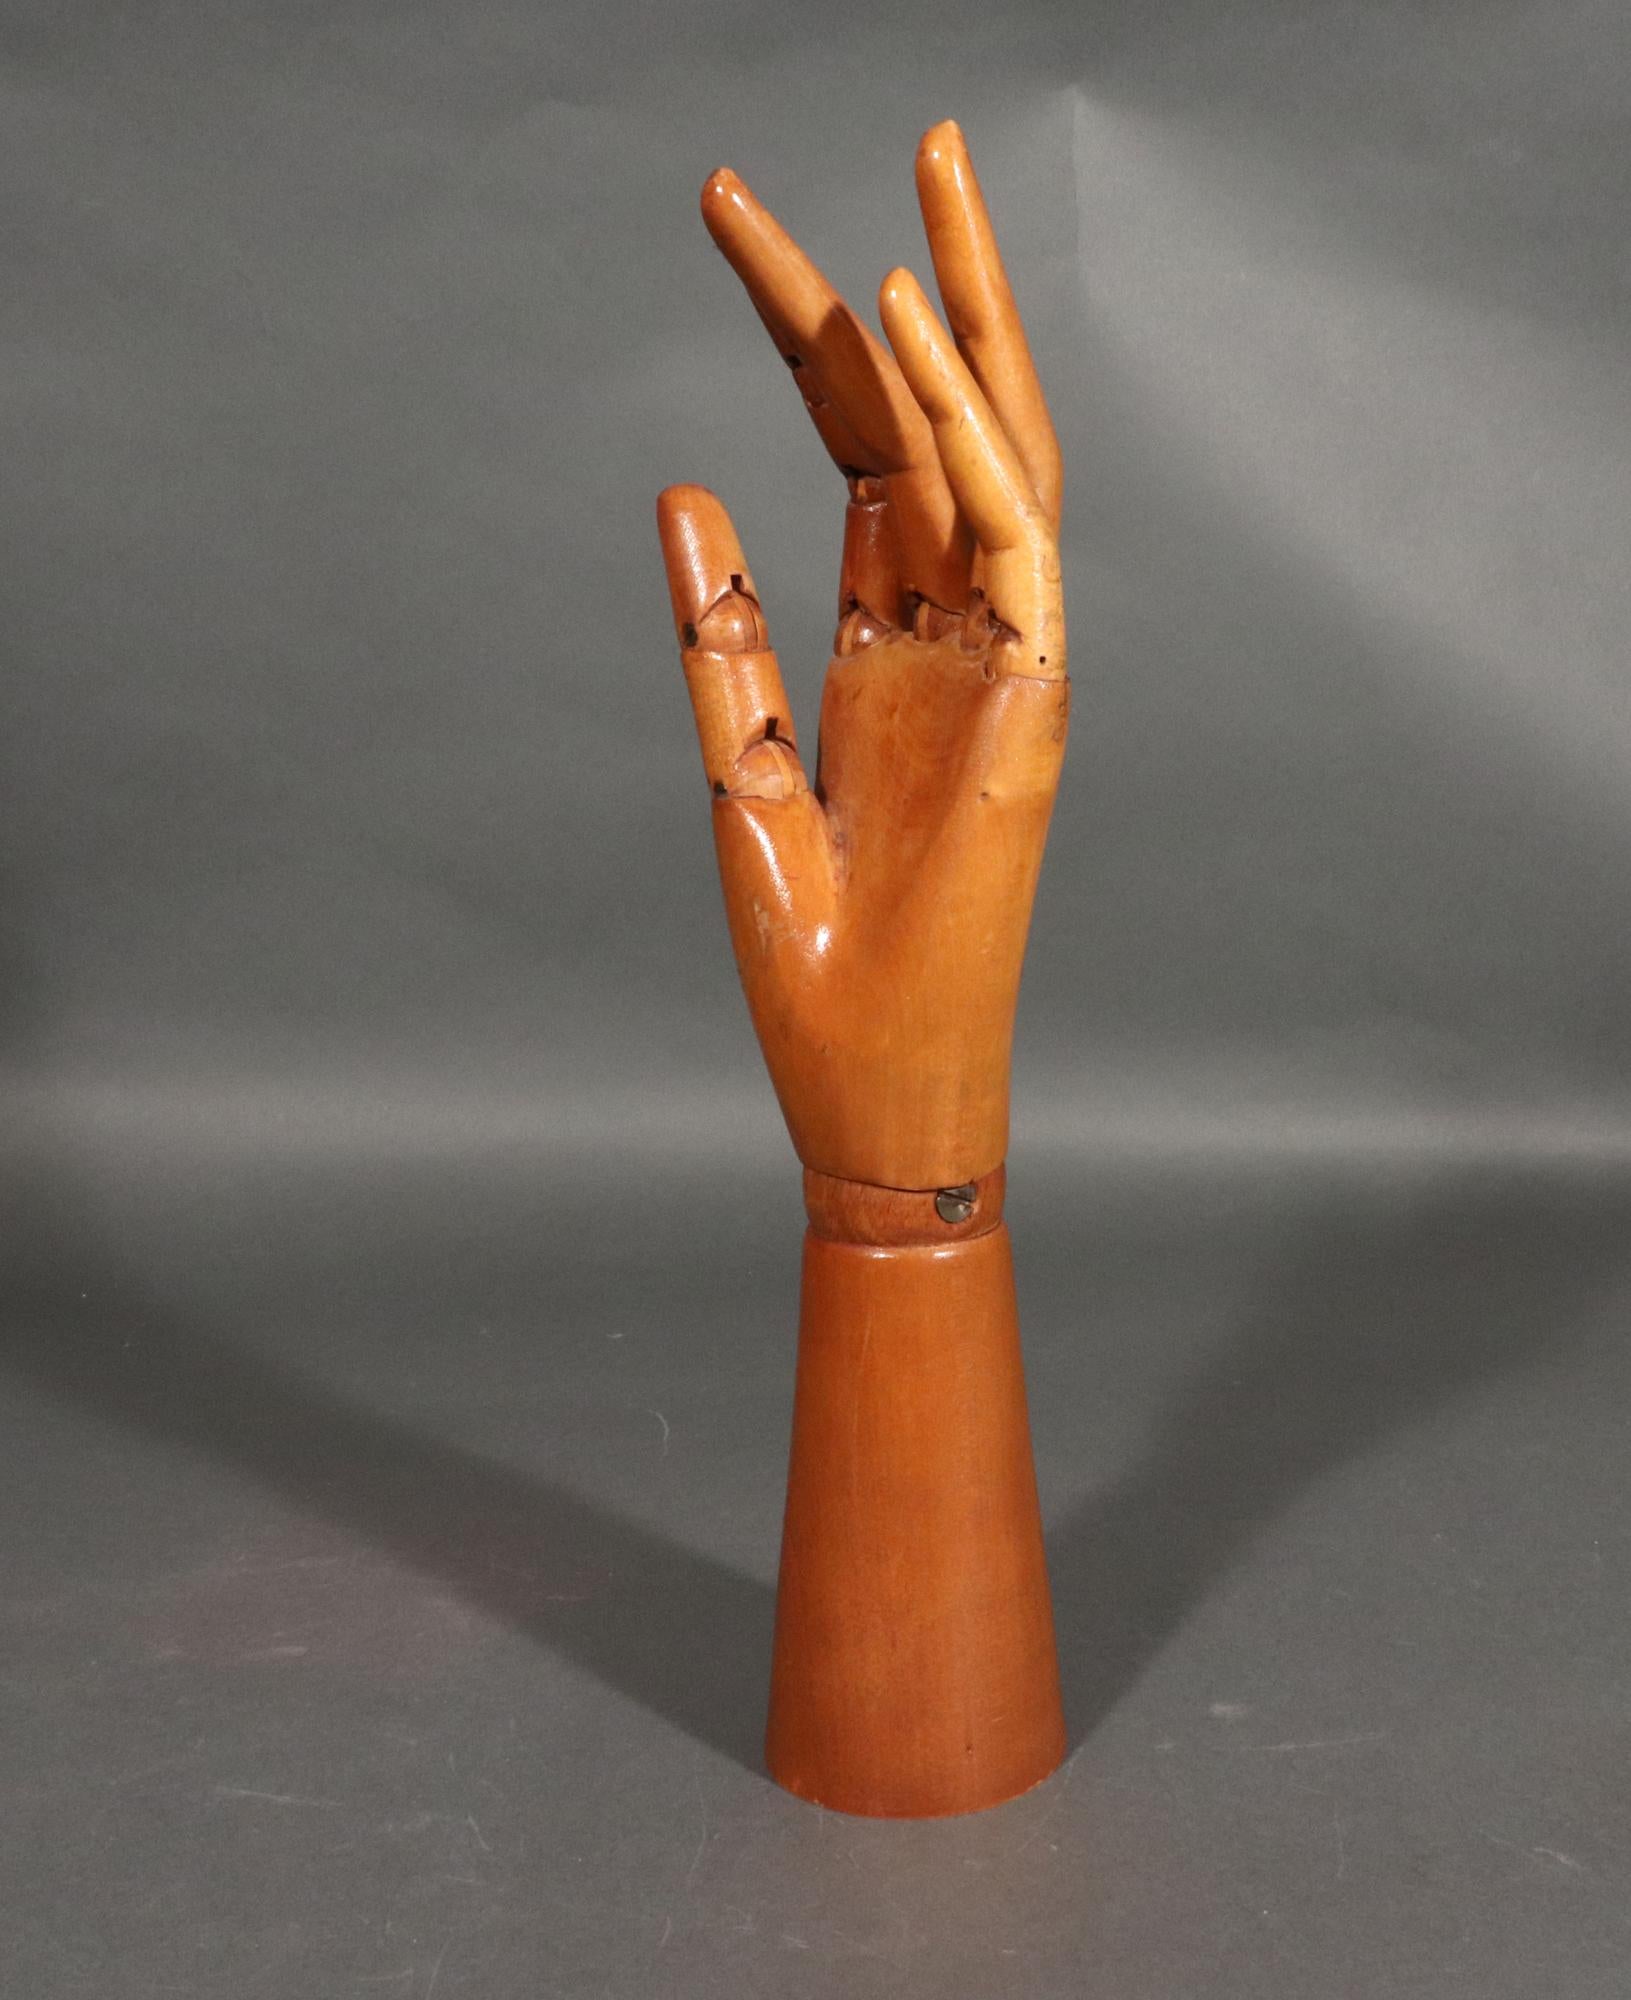 Articulated Wood Artist Hand Model,
1950s

The carved light wood hand is articulated at the wrist and the base of each finger while the forefinger and thumb are also articulated at the knuckle and the other fingers each have a slight natural bend. 